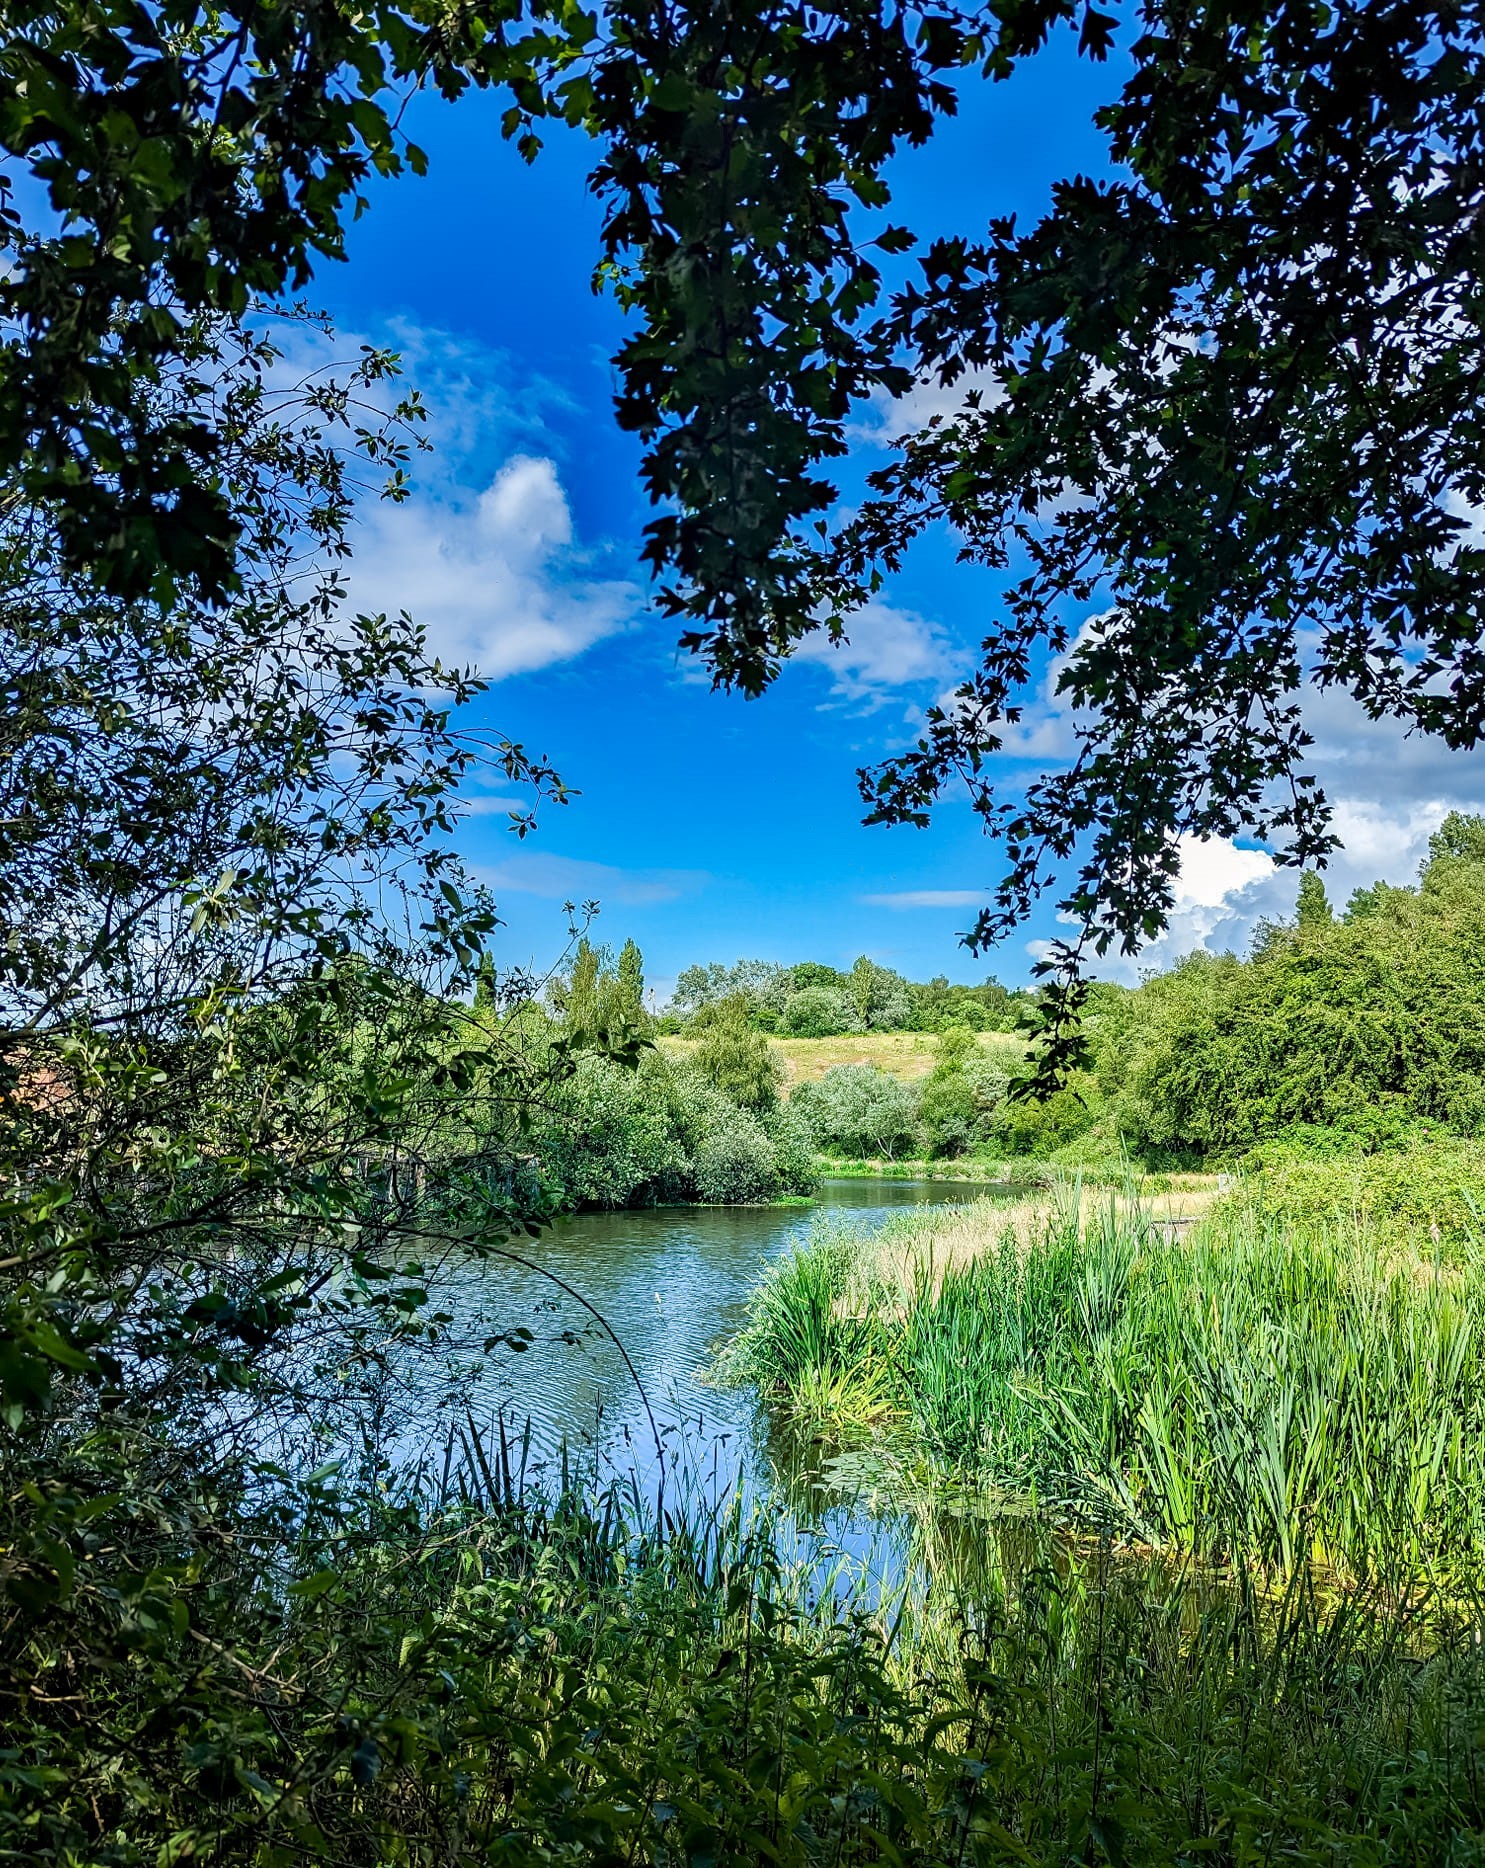 Down by the river on Winsford common by Stacey Jones